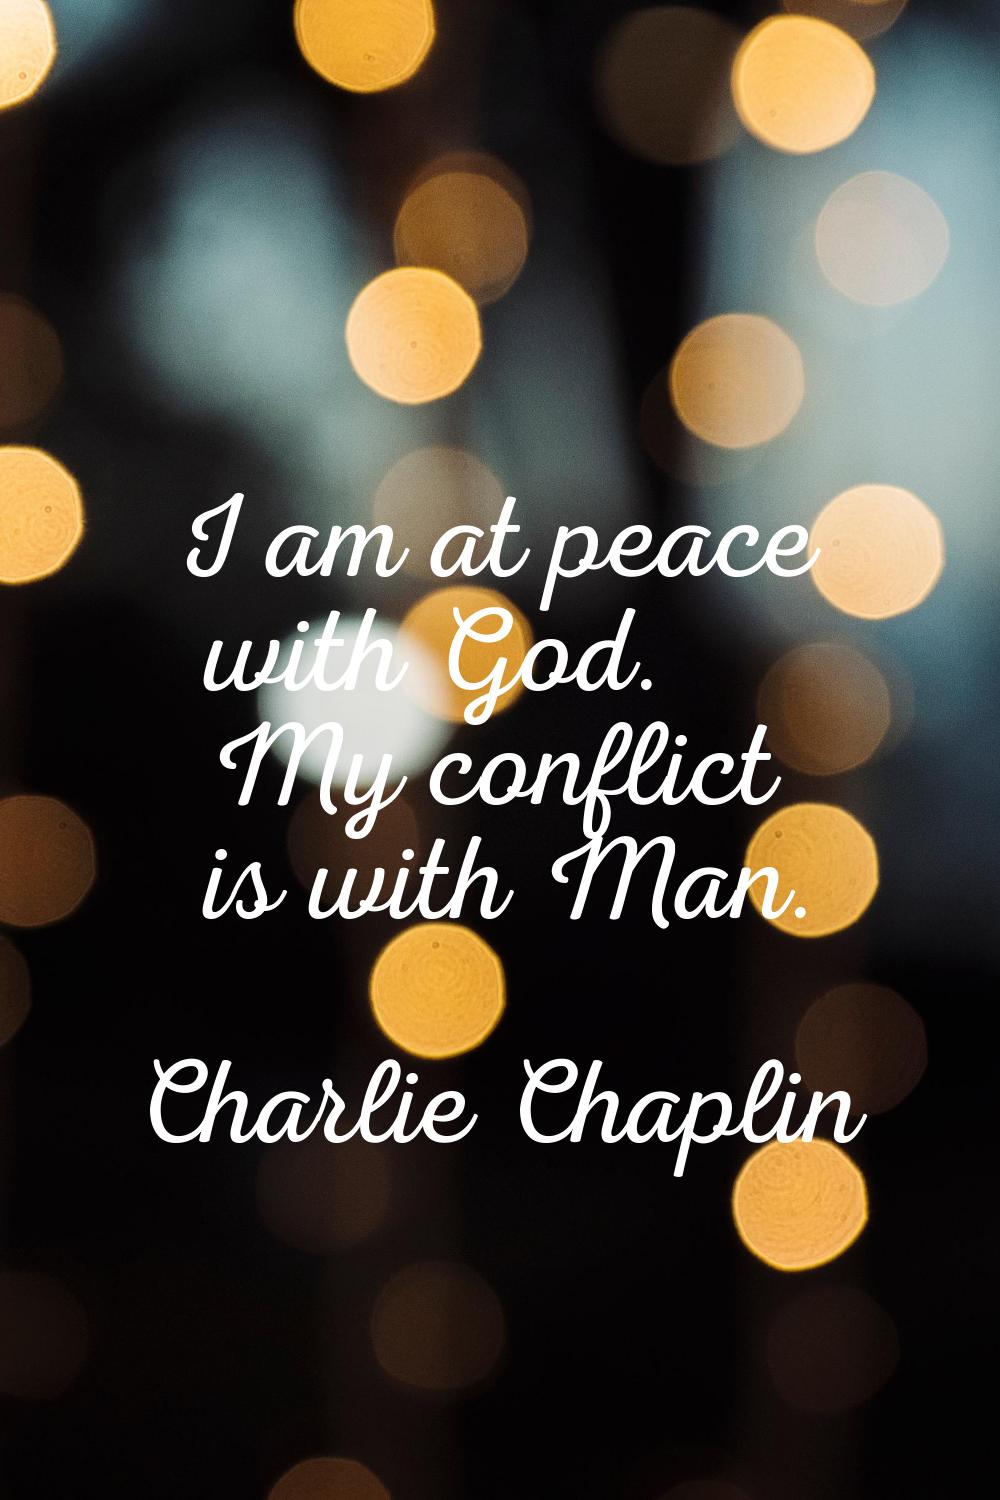 I am at peace with God. My conflict is with Man.